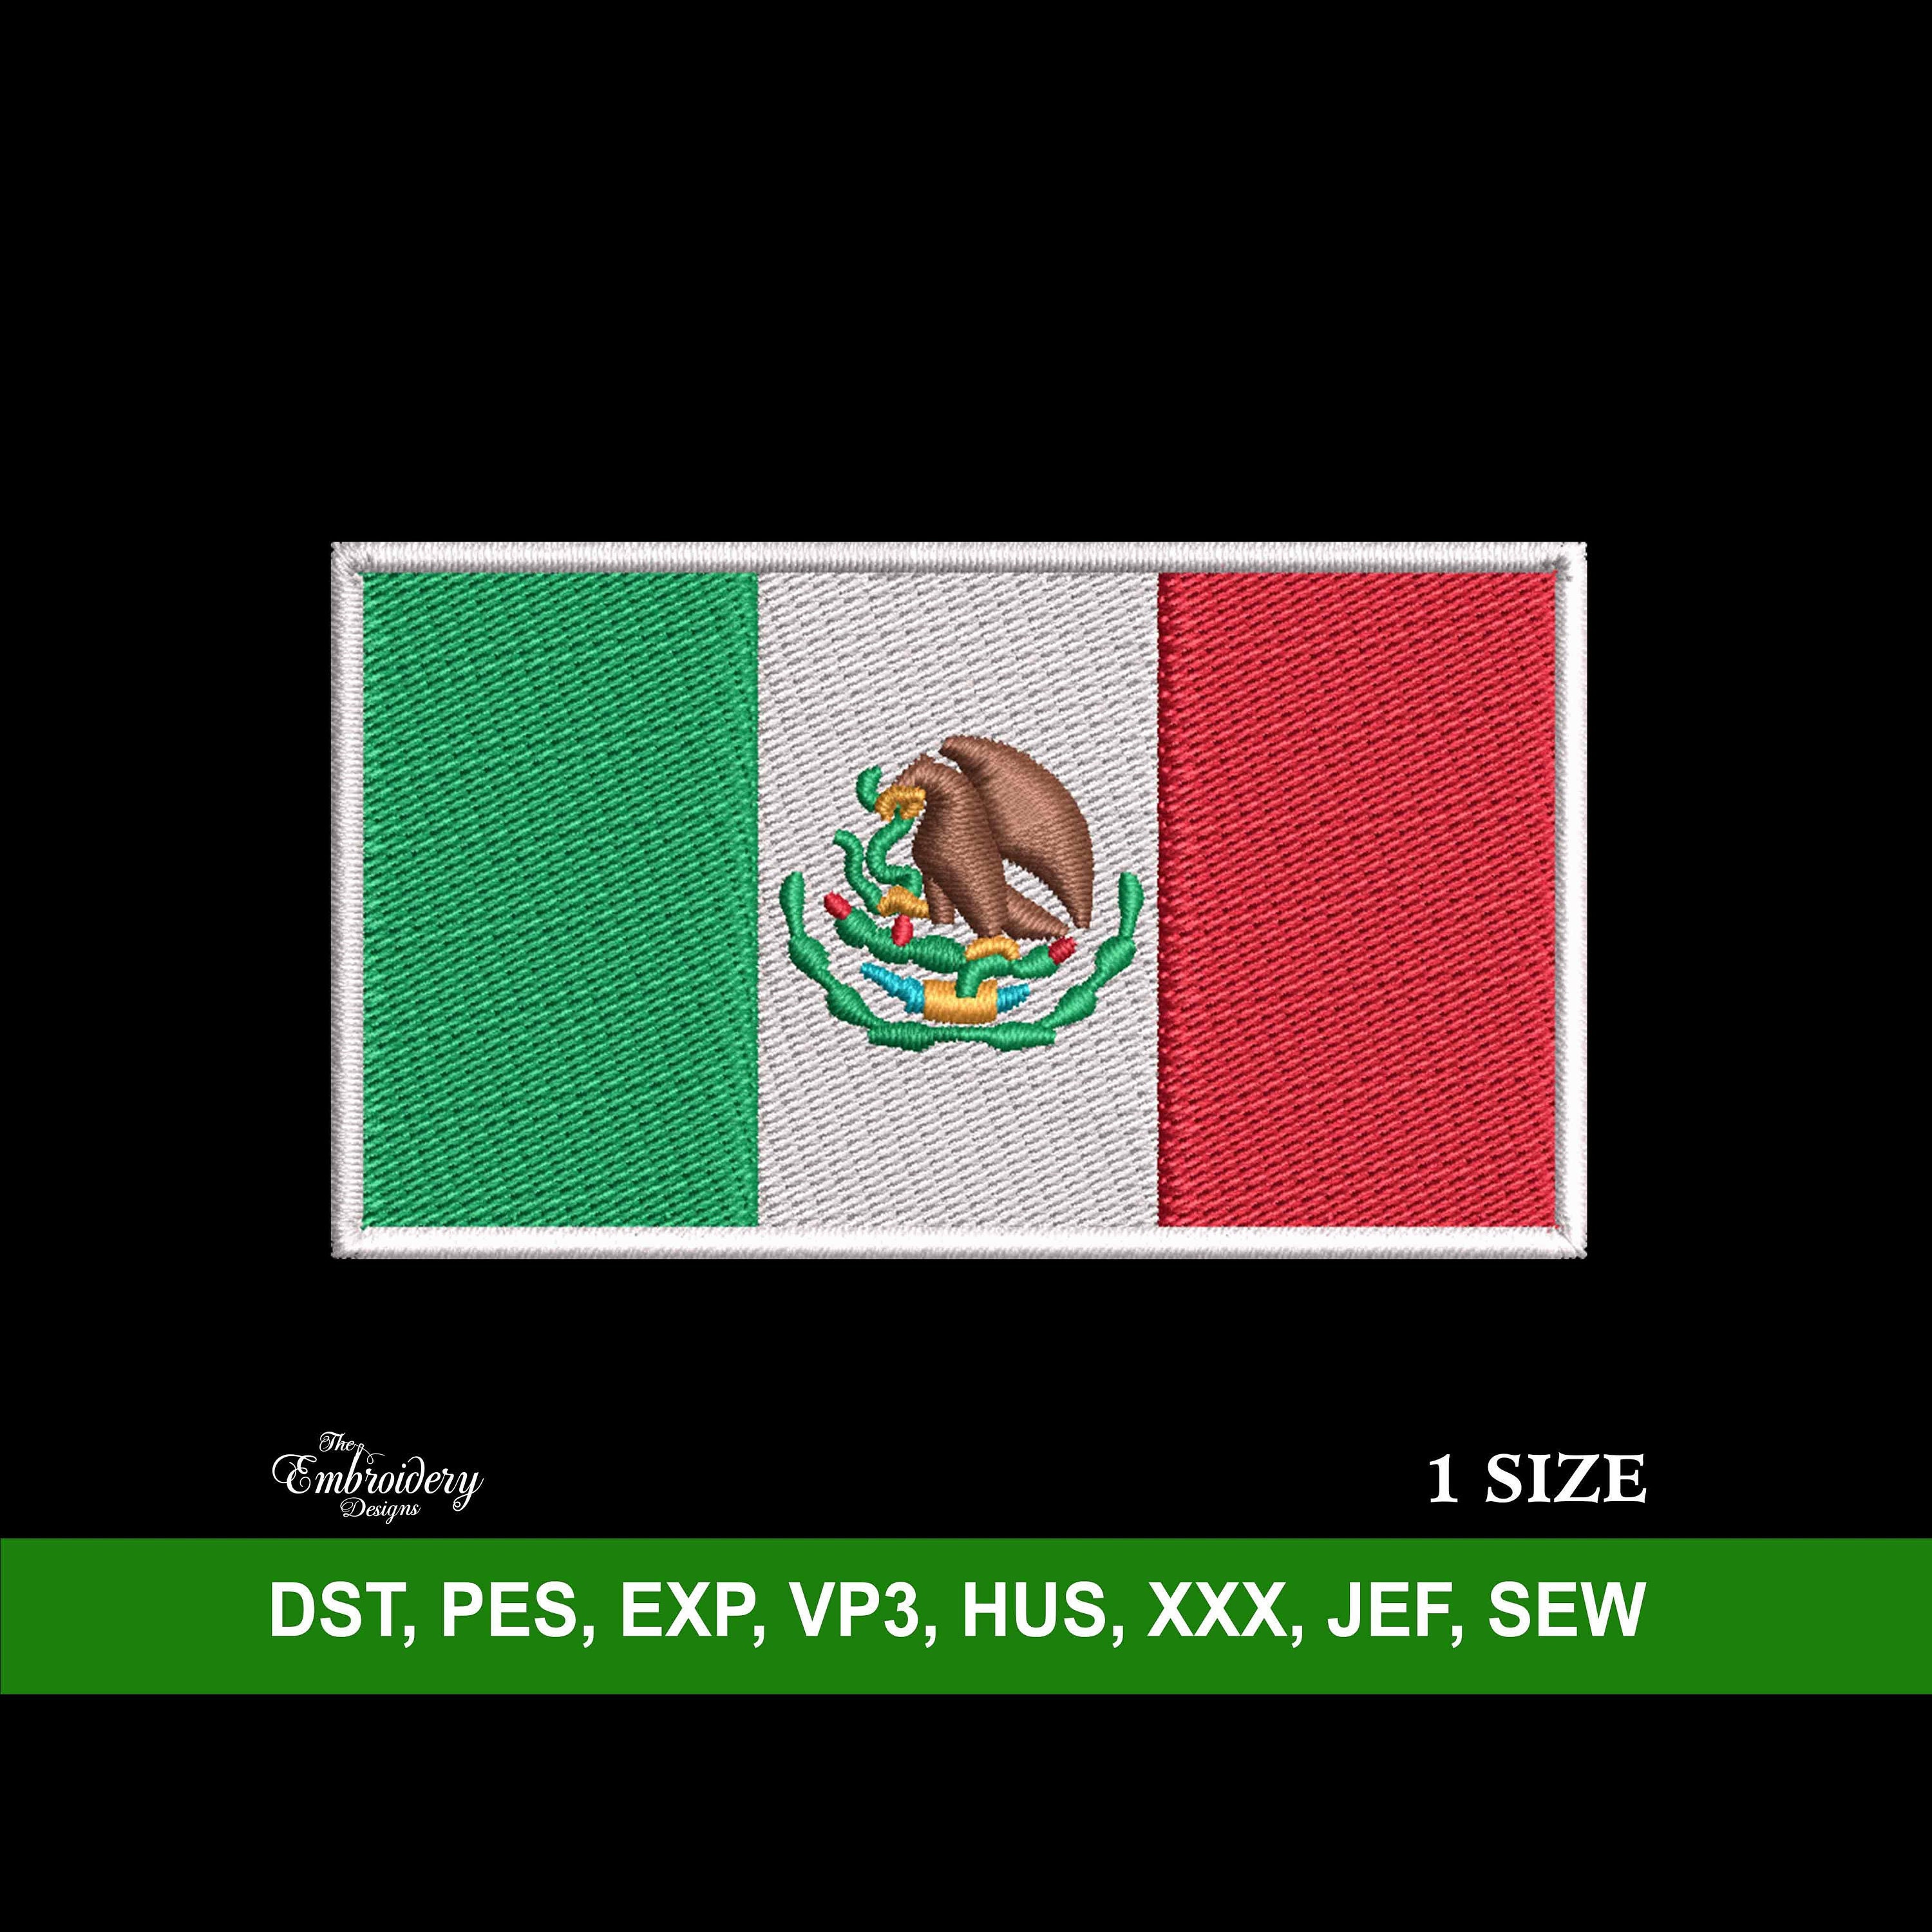 US/Mexico Flags Patch